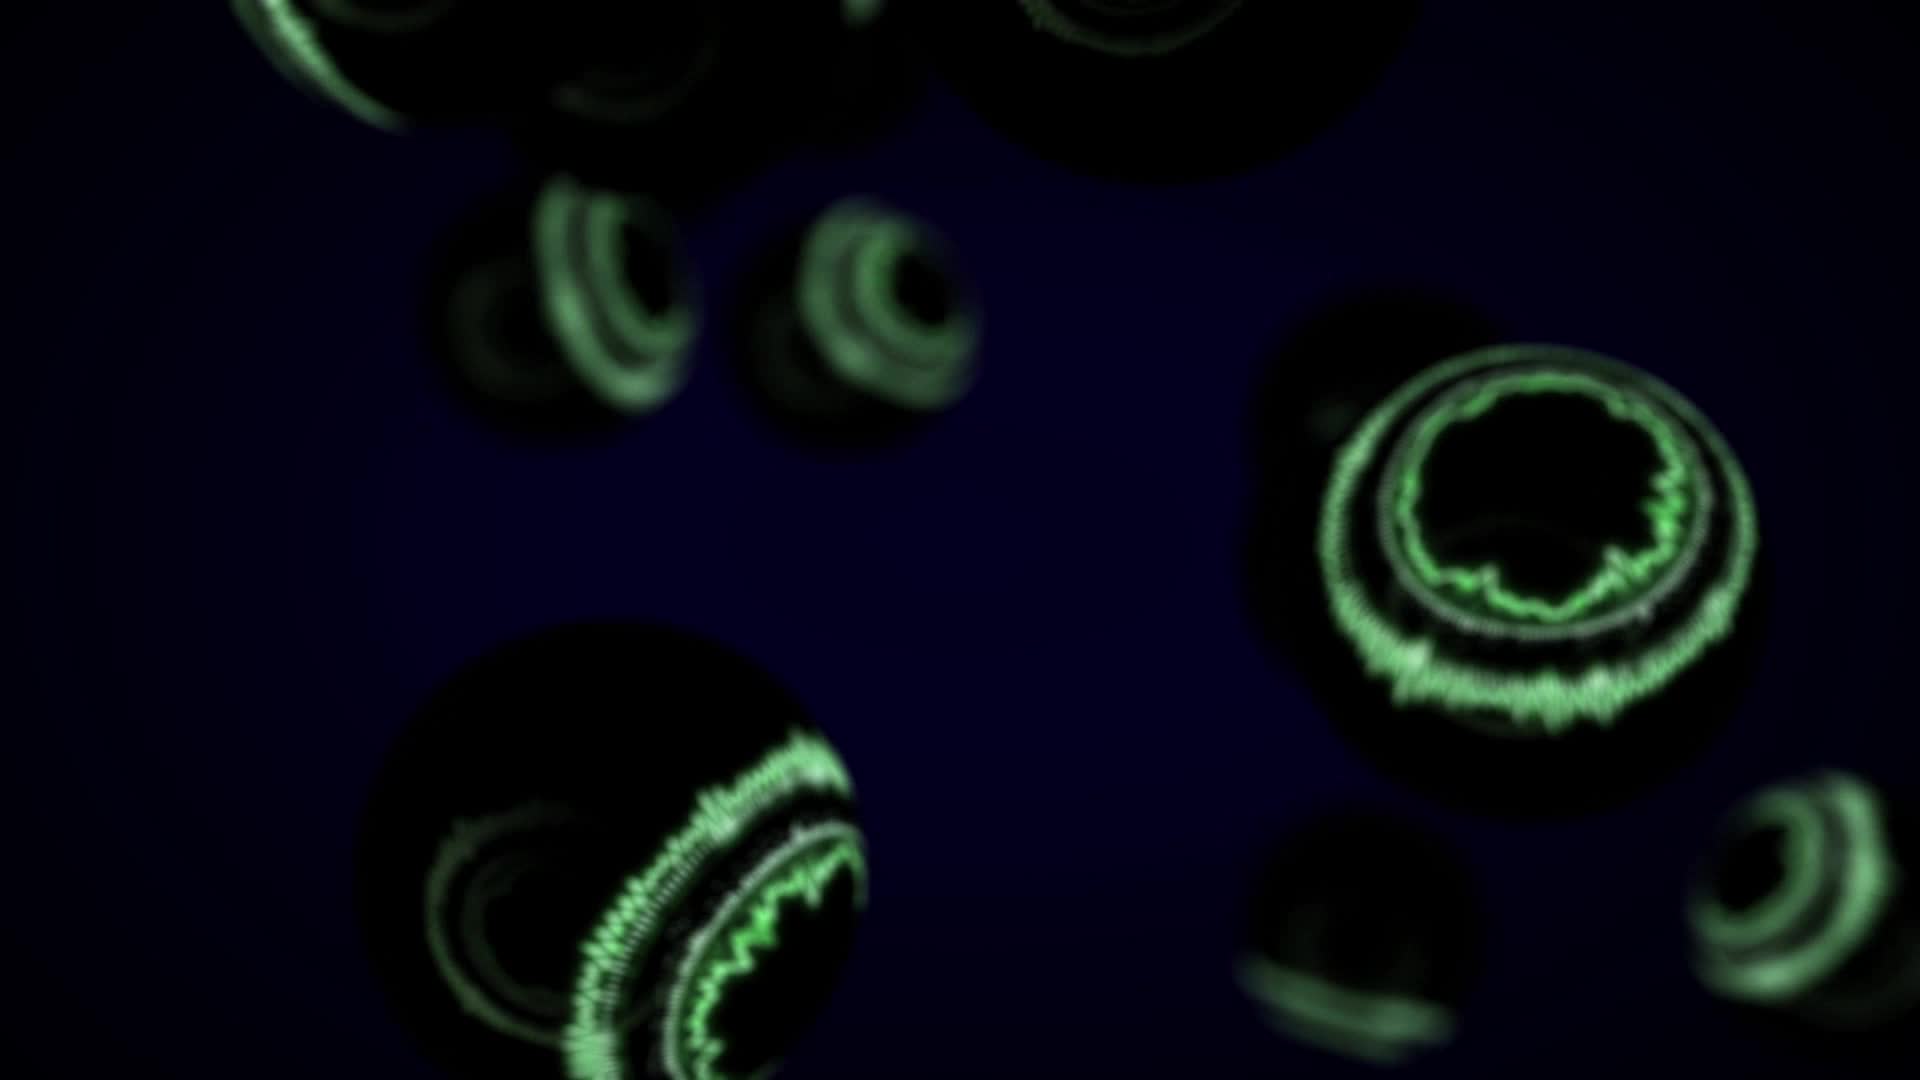 Video of Abstract Digital Balls in HD